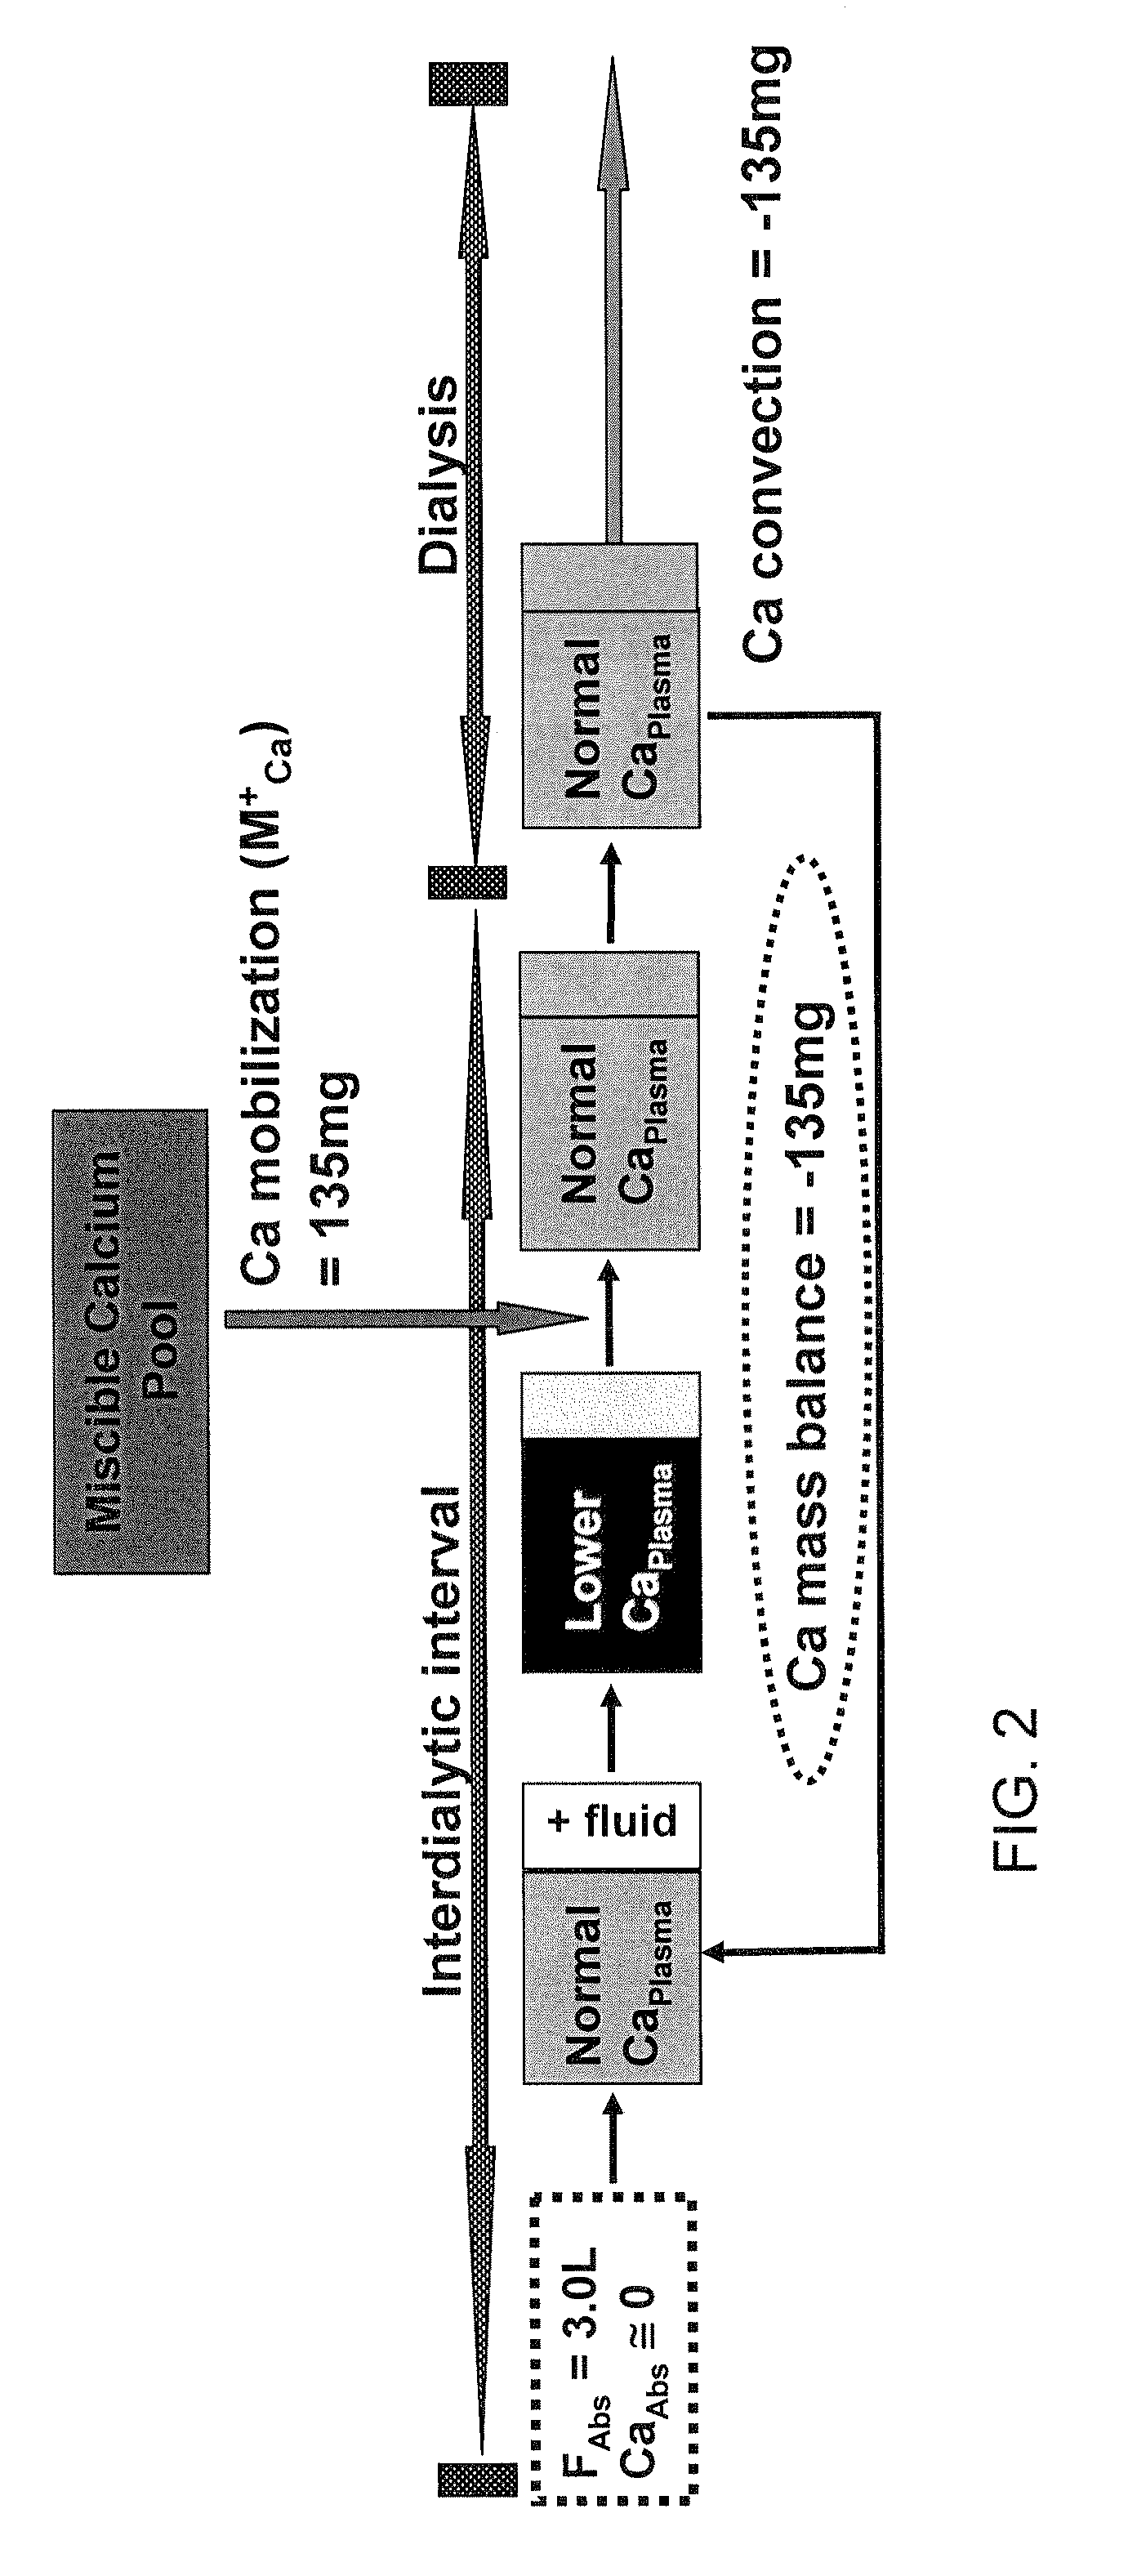 Method of Determining A Phosphorus Binder Dosage for a Dialysis Patient